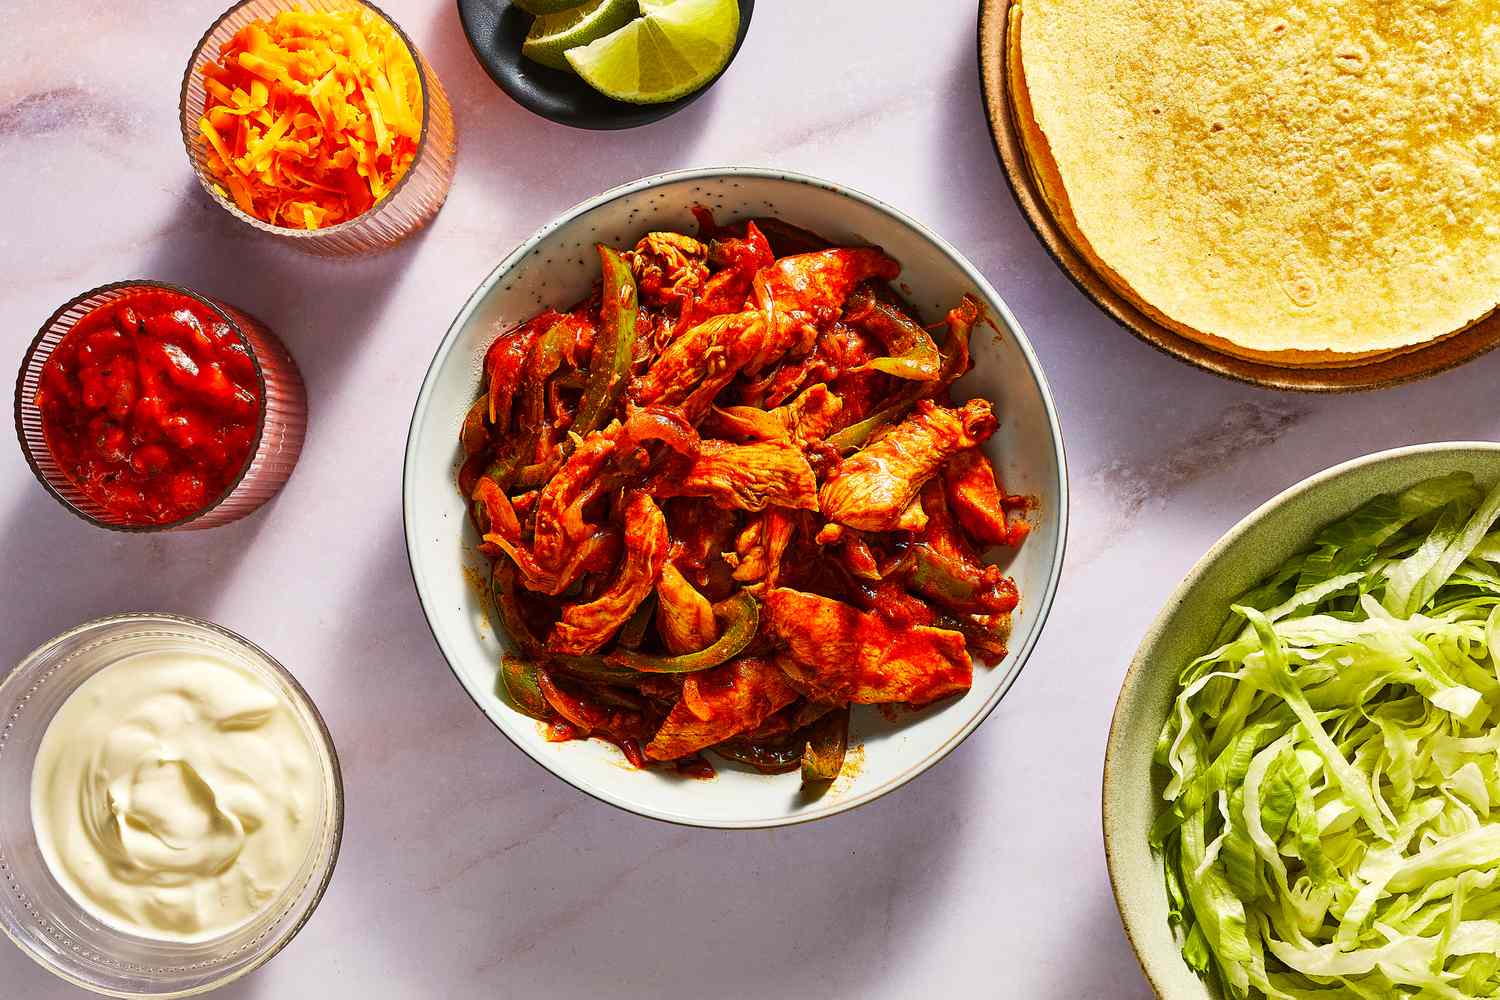 how-to-make-quick-and-easy-chicken-fajitas